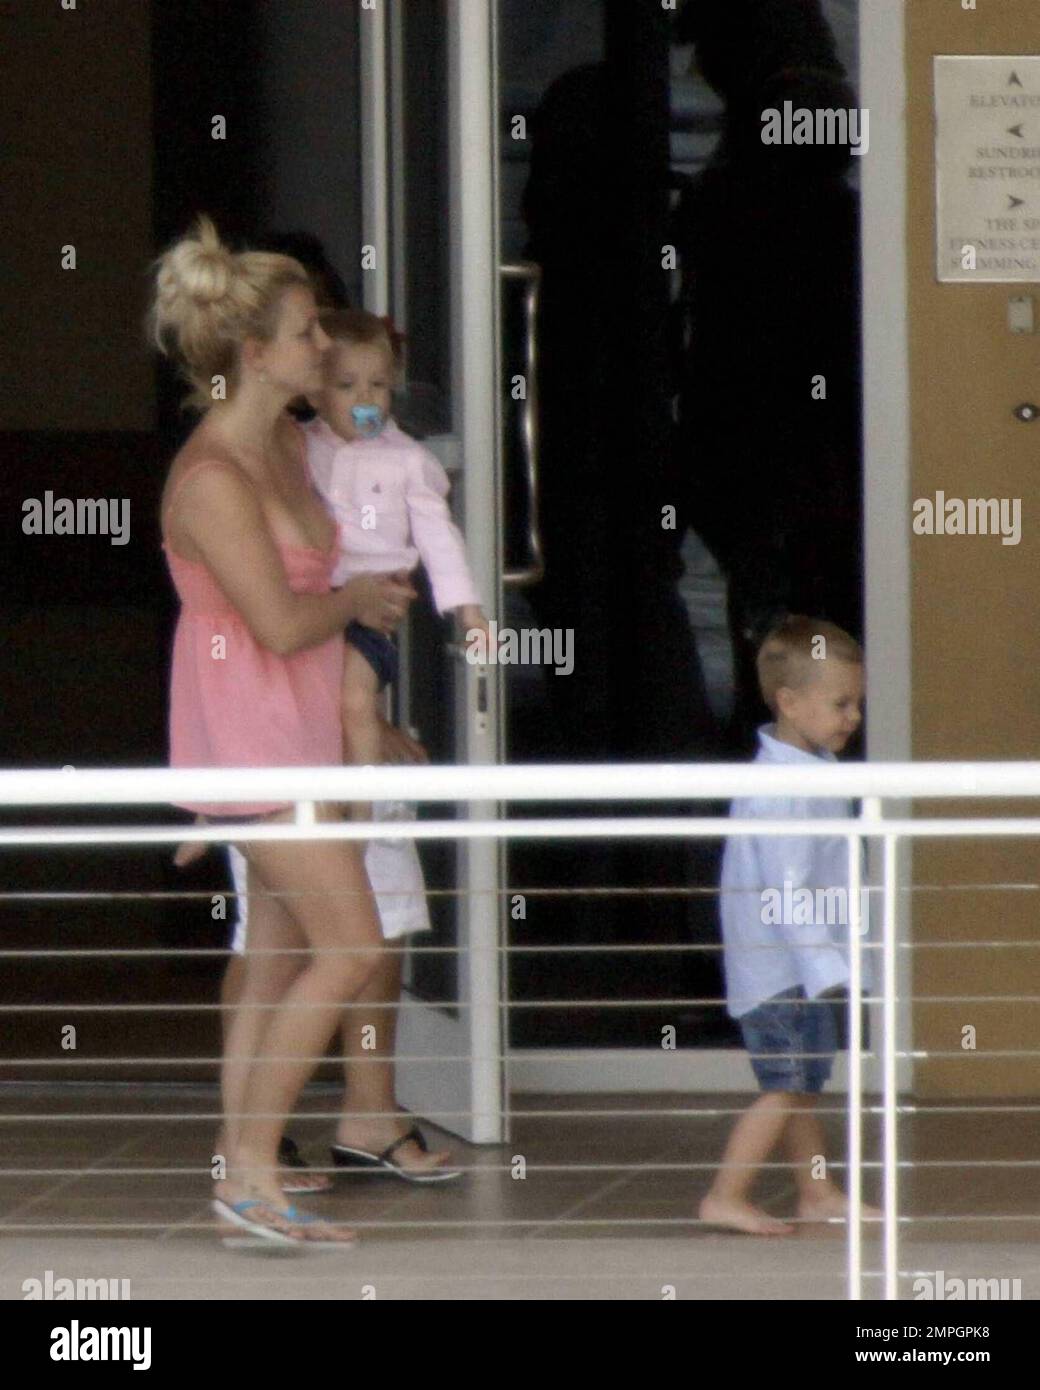 Britney Spears spends time with her sons Jayden James and Sean Preston at her posh hotel. Britney's sister Jamie Lynn Spears also spent time at the hotel today, along with Britney's dad Jamie, who enjoyed the view from his balcony while making a call. Miami, FL.  9/2/09. Stock Photo